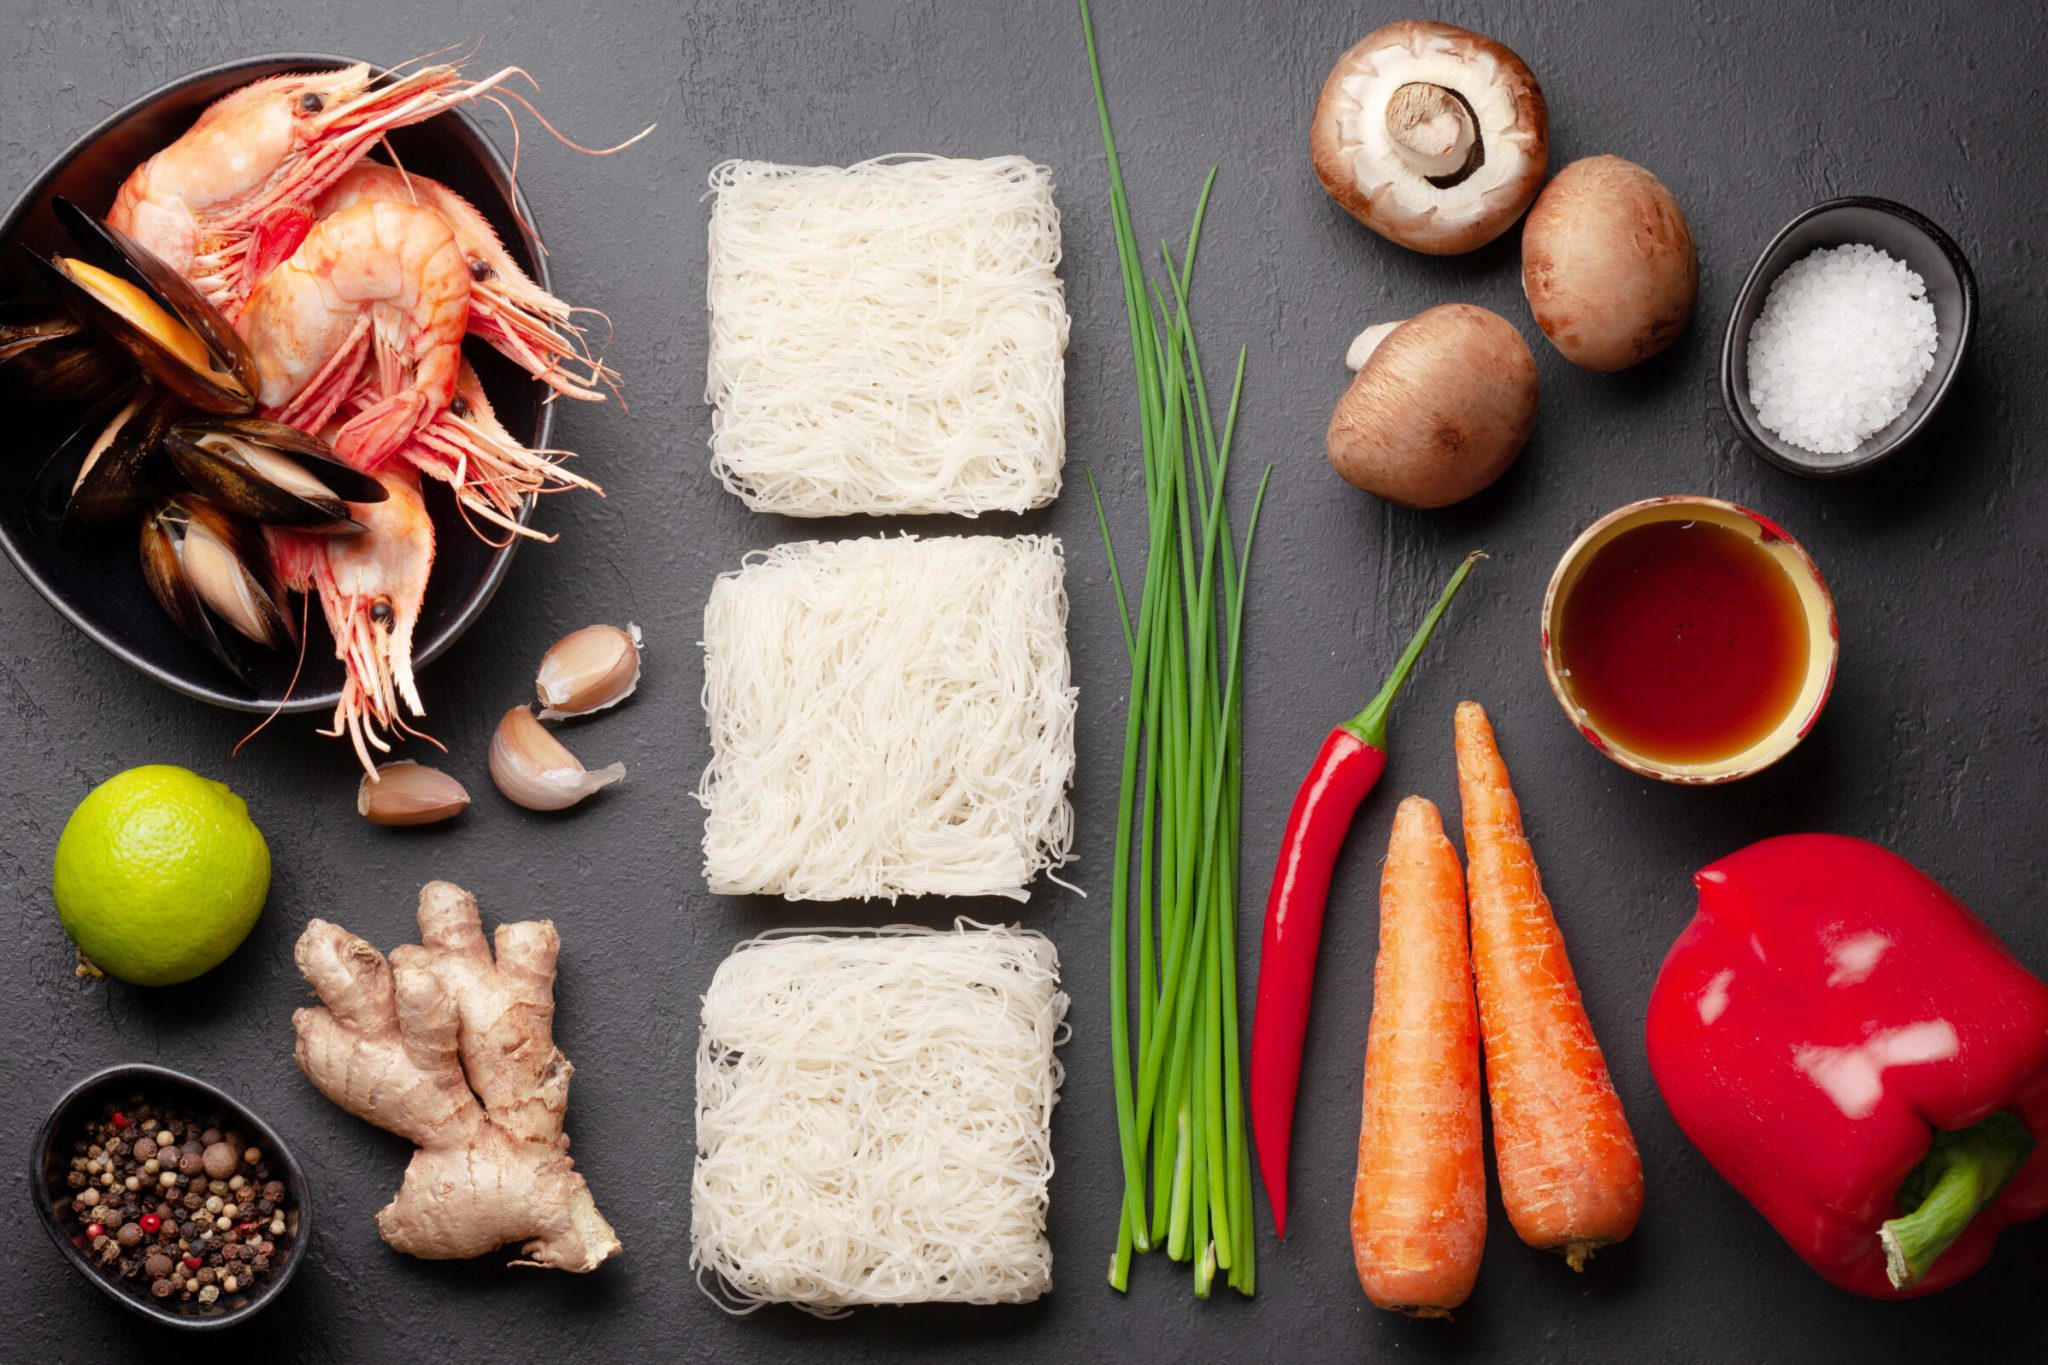 Ingredients for wok cooking with stir fried noodles, shrimps and vegetables on stone background. Top view flat lay